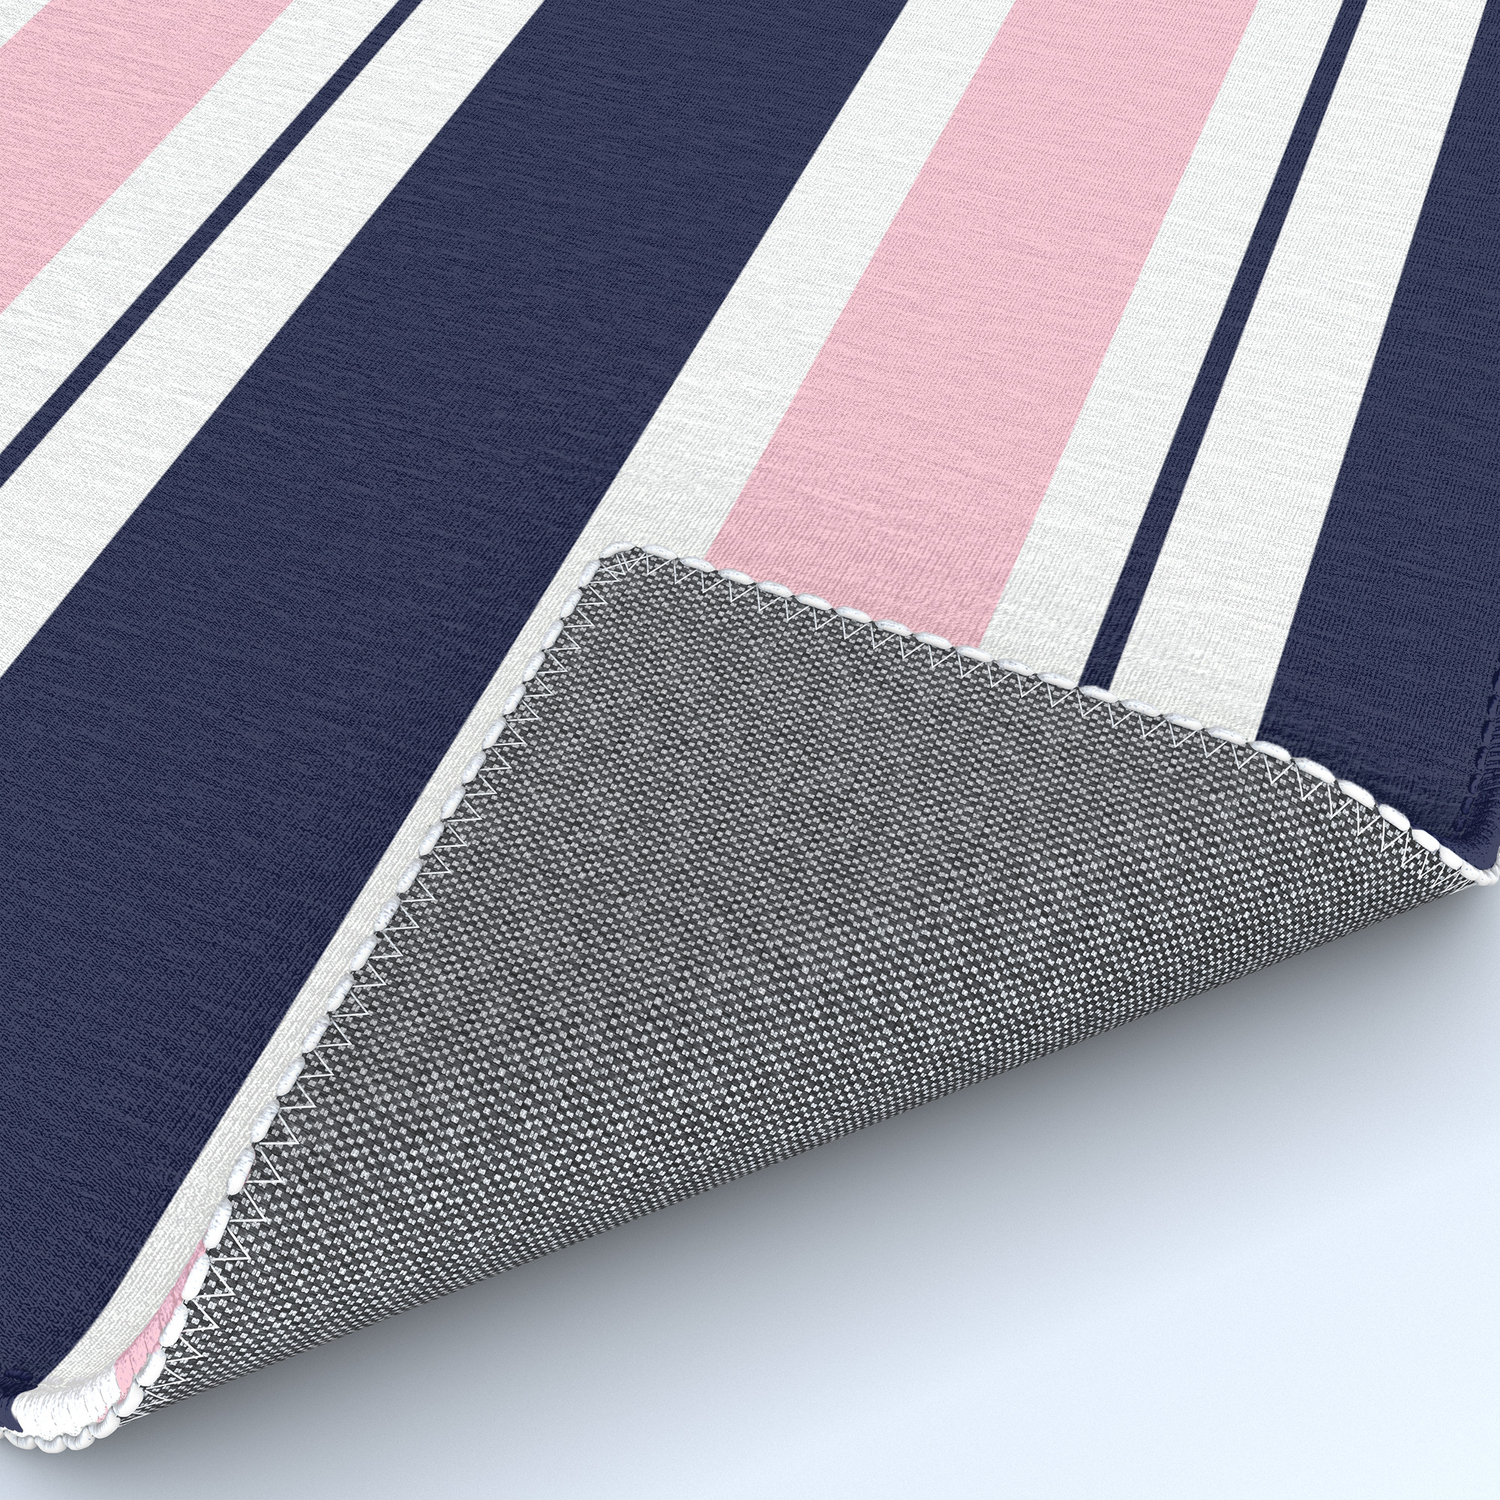 Blue Navy And Pink Stripes Rug By, Navy And White Striped Rug